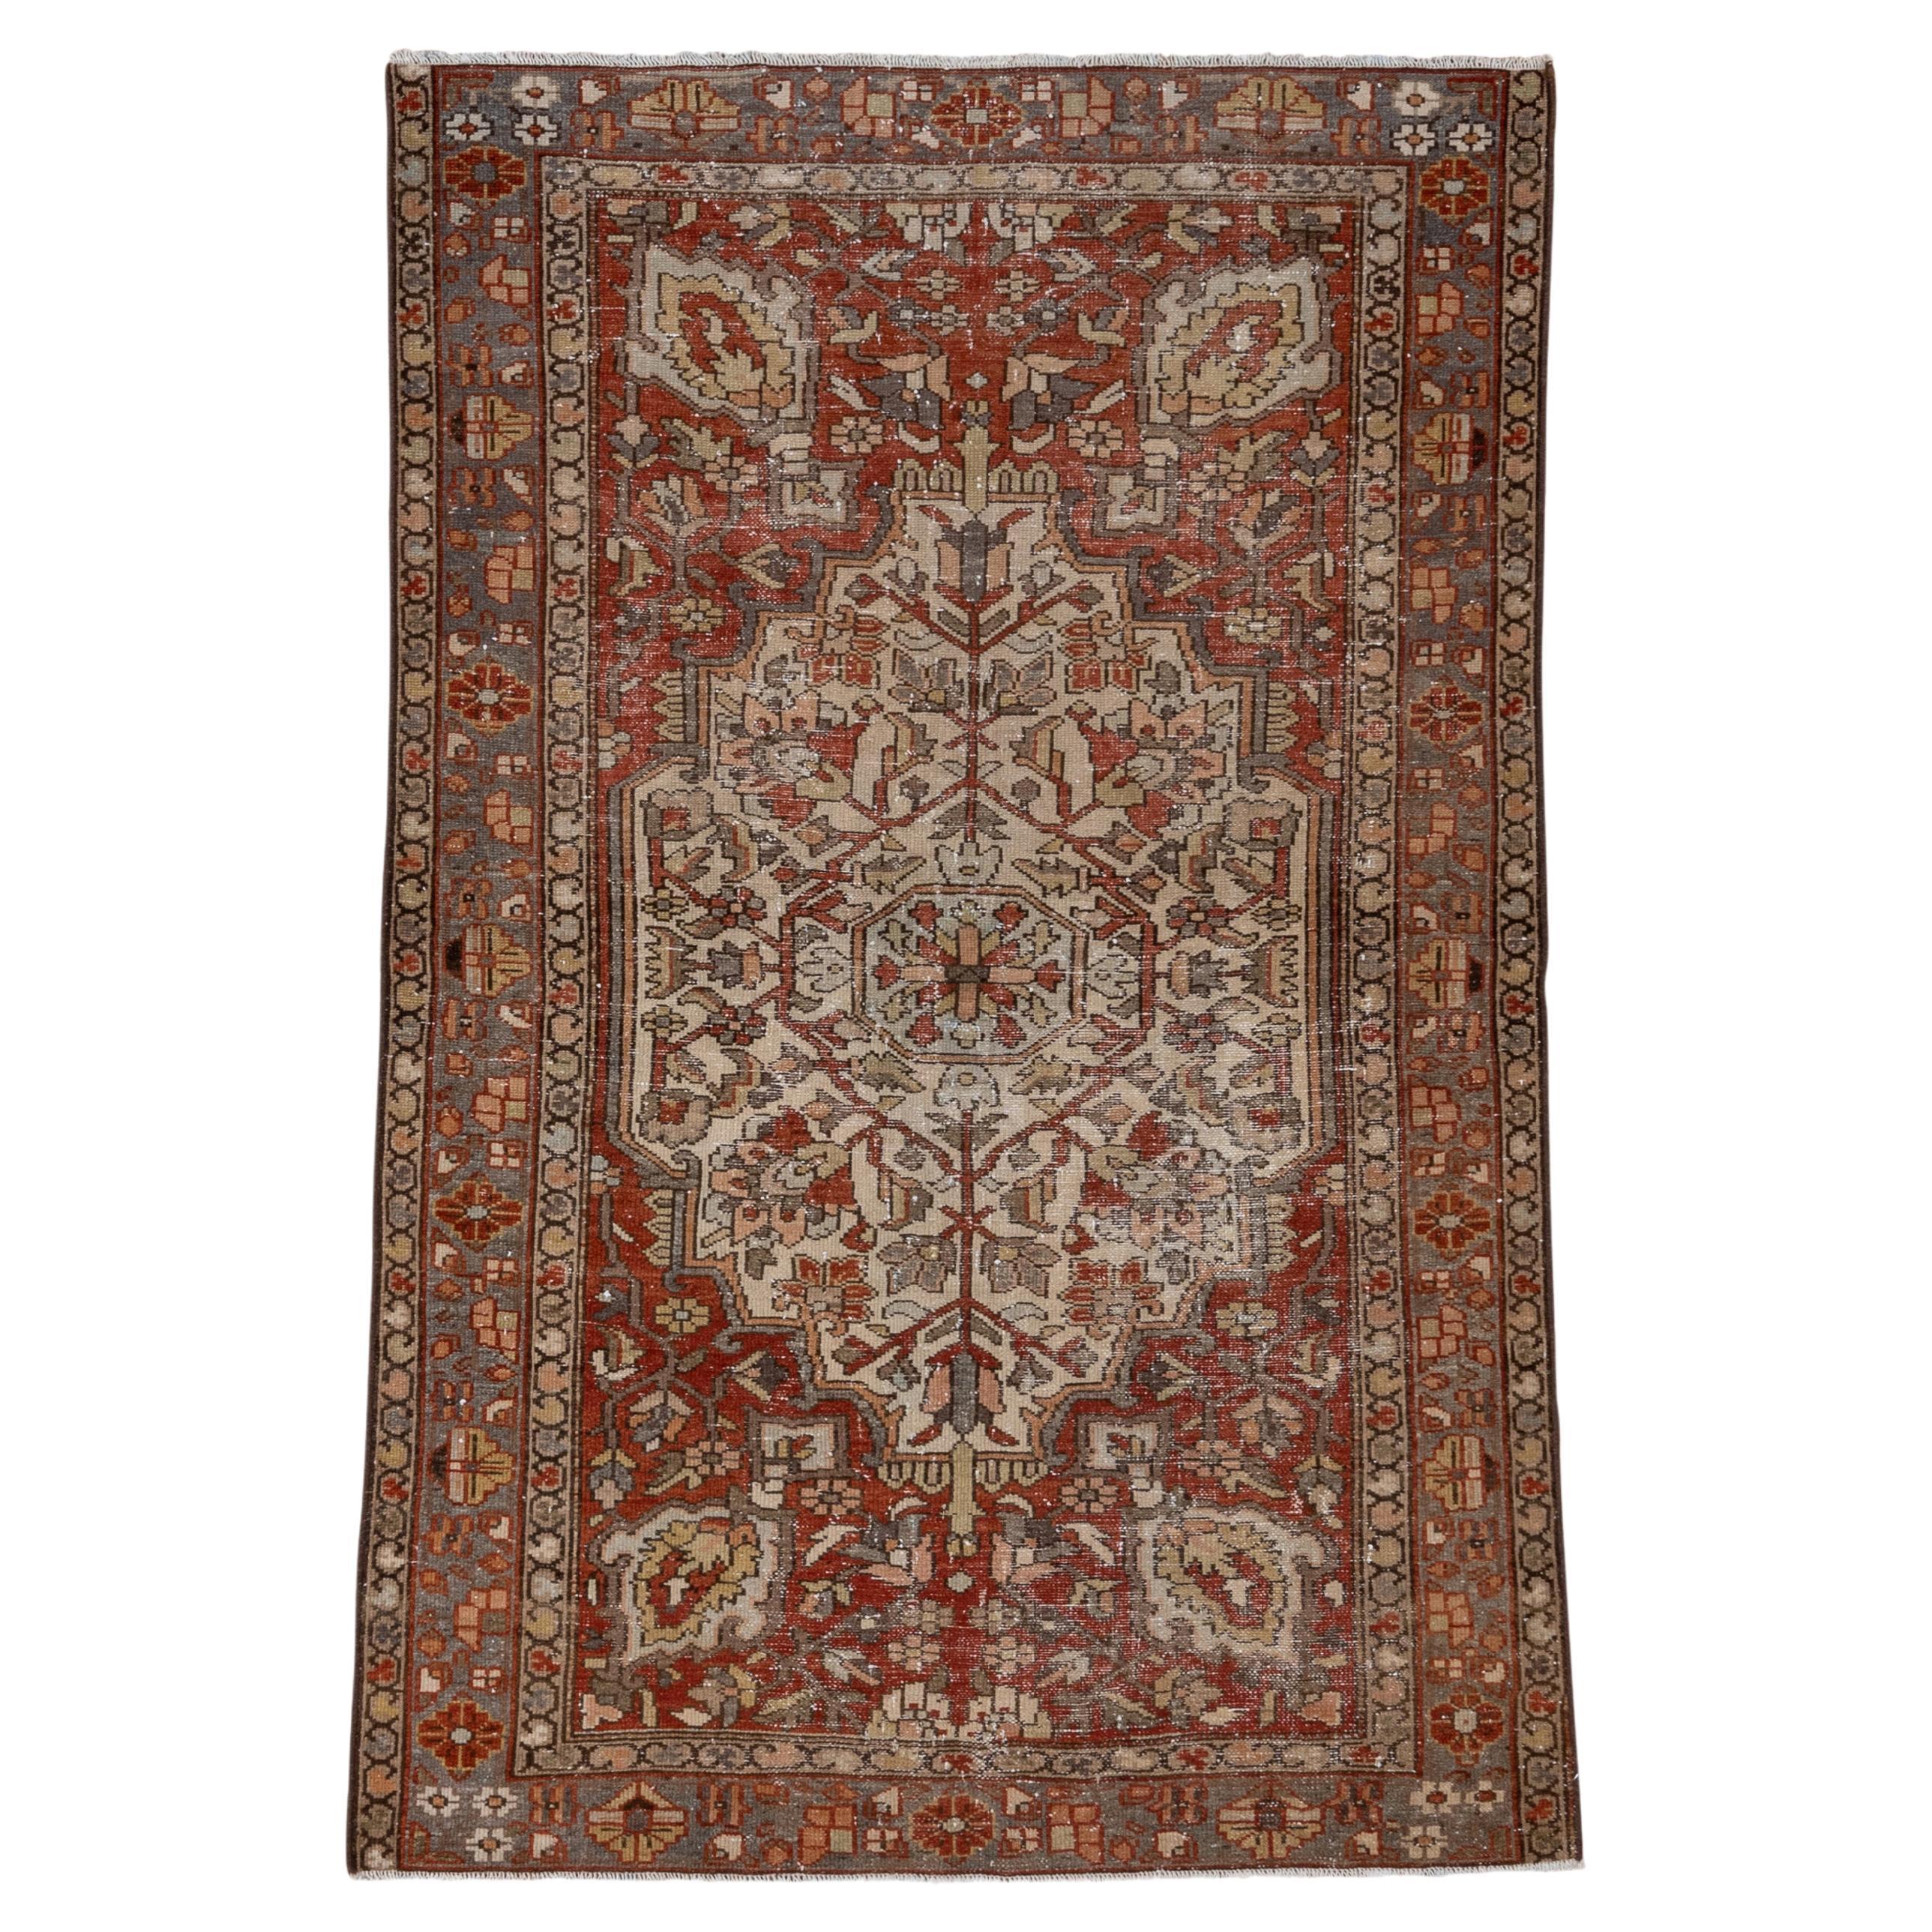 Antique Persian Baktiary Rug, Farahan Sarouk Style, Ivory & Red Field For Sale